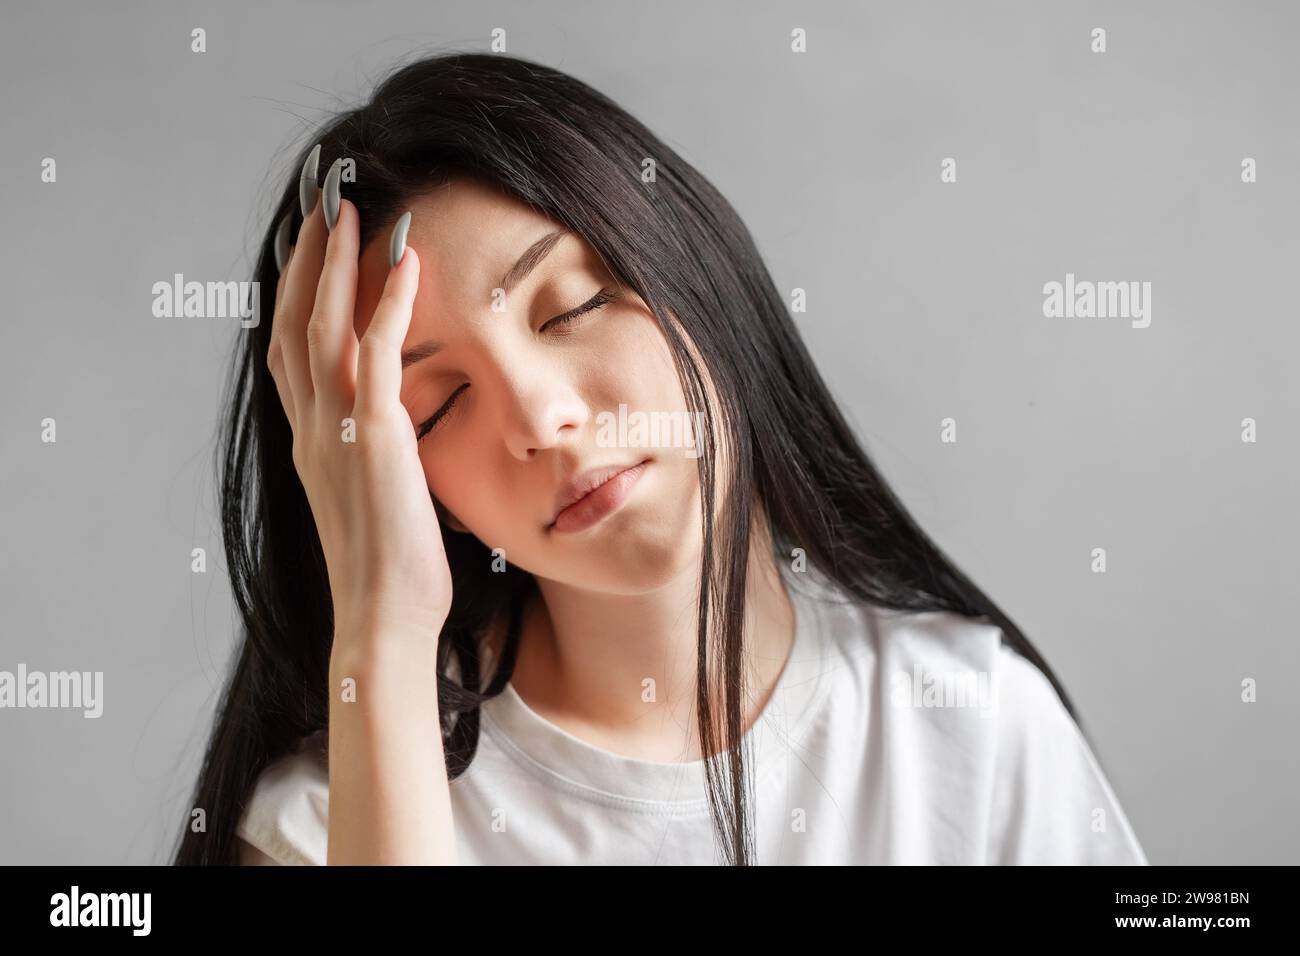 Portrait of a young teenager girl who looks sad. Stock Photo